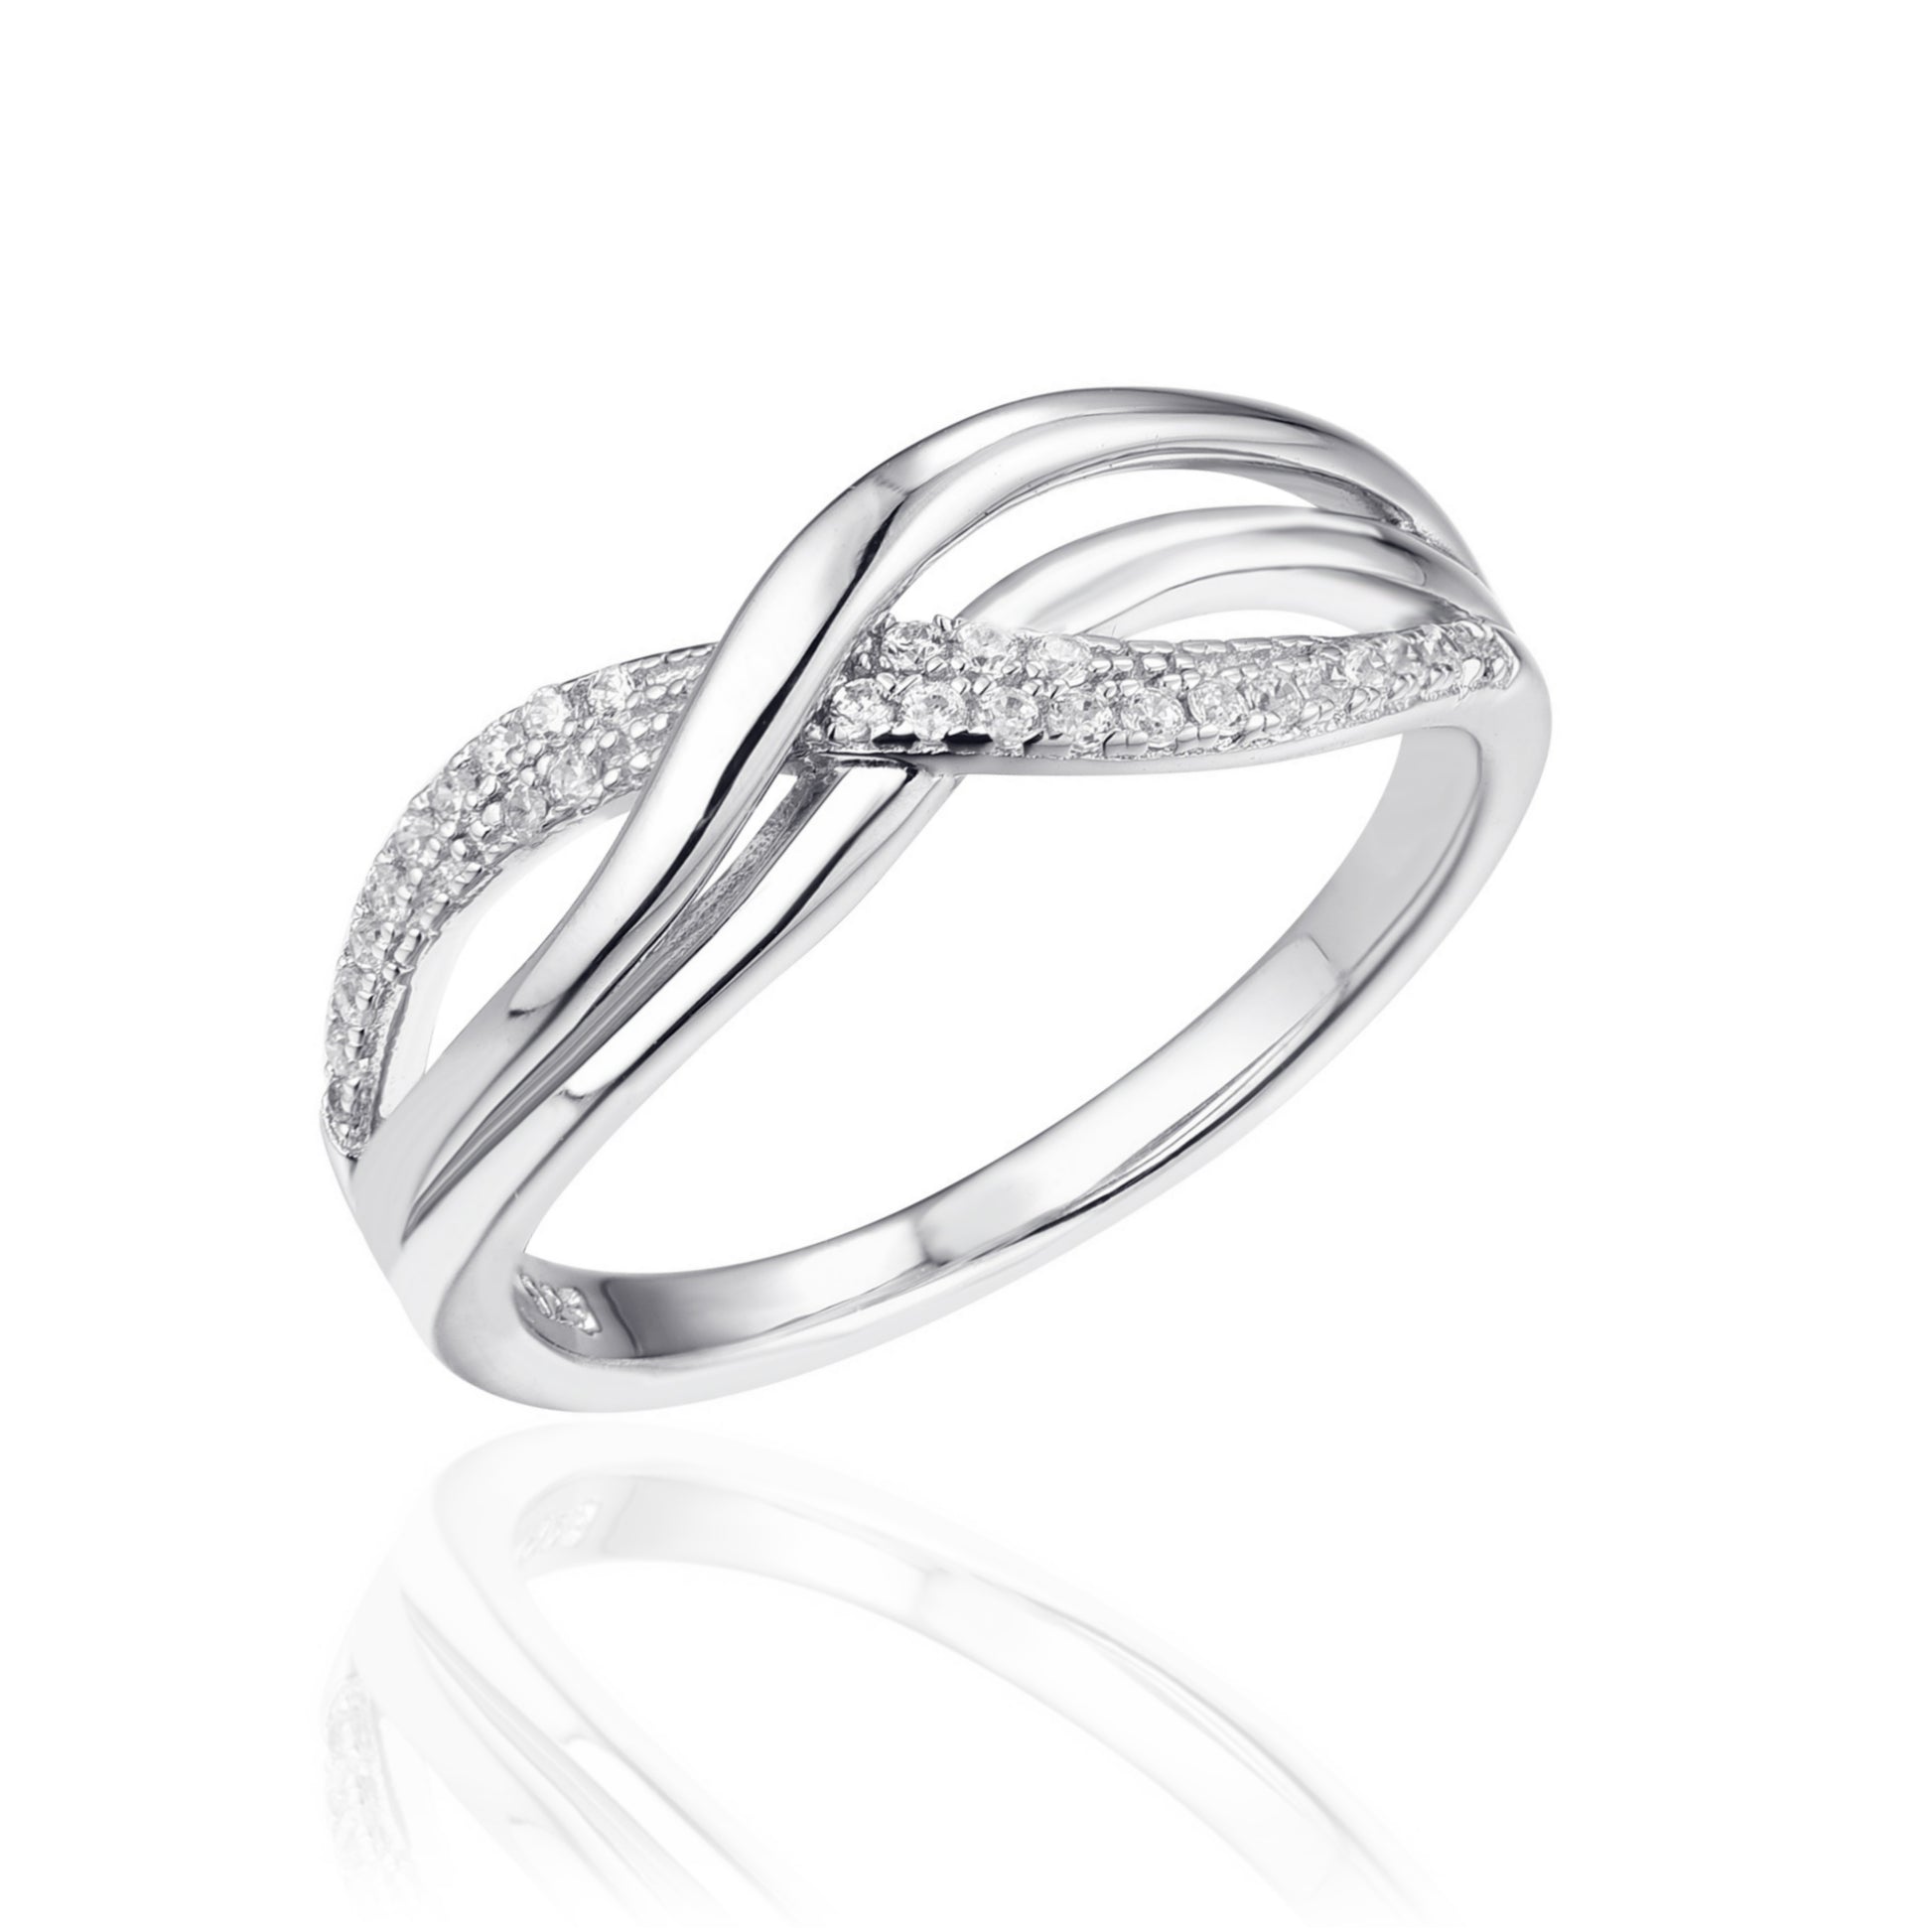 Sterling Silver Micropave Double Row Double Braid Ring - HK Jewels